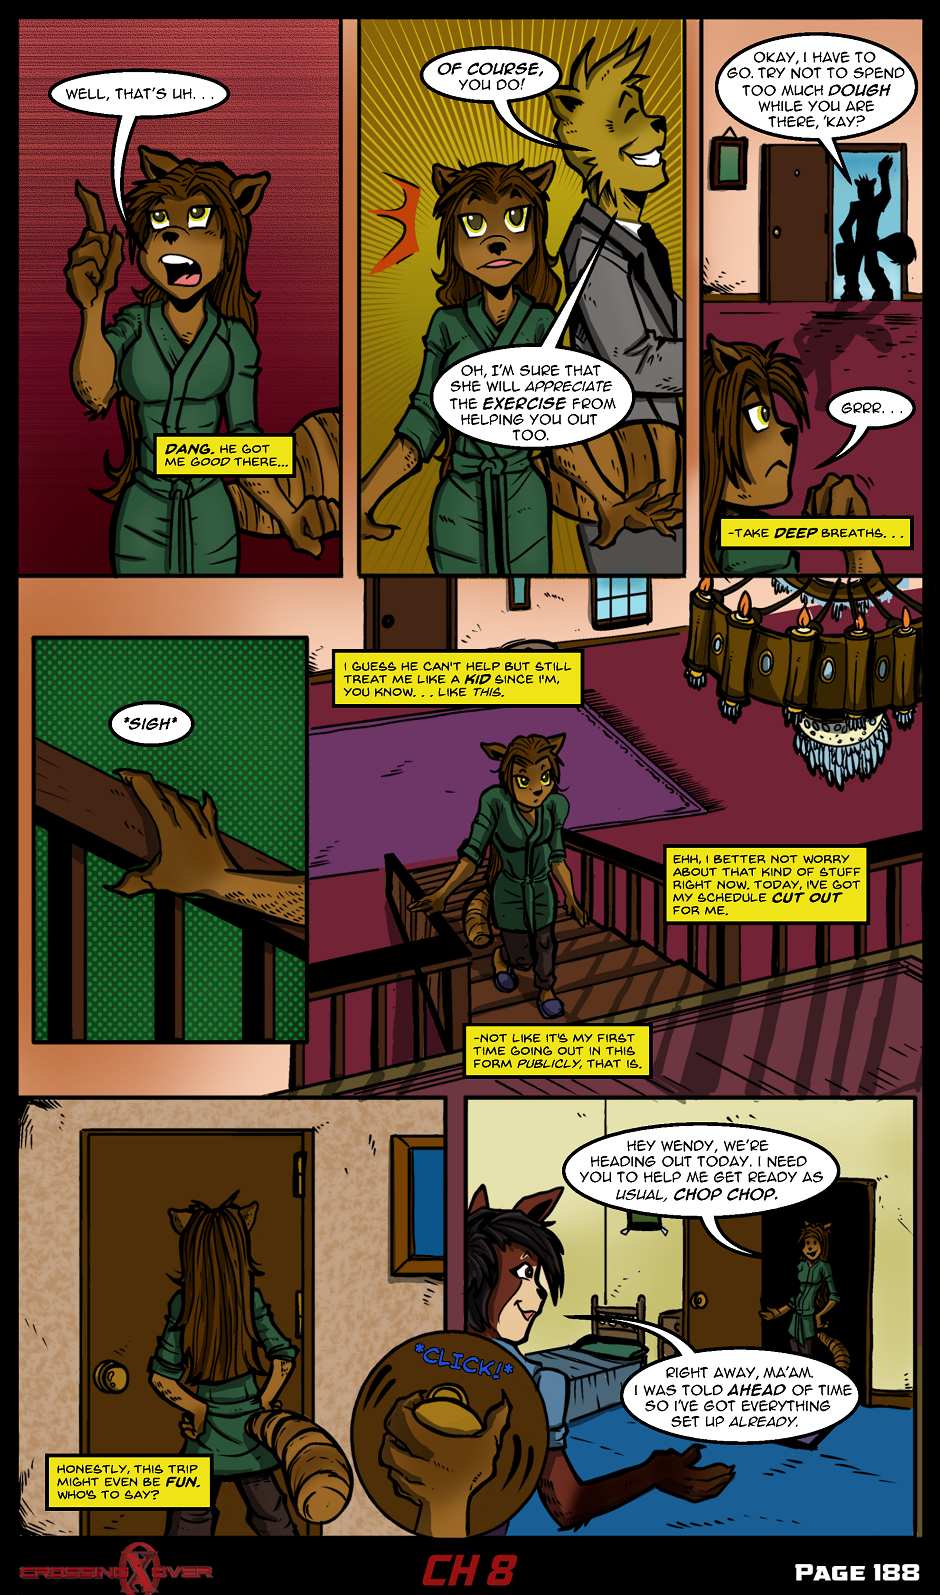 Page 188 (Ch 8)